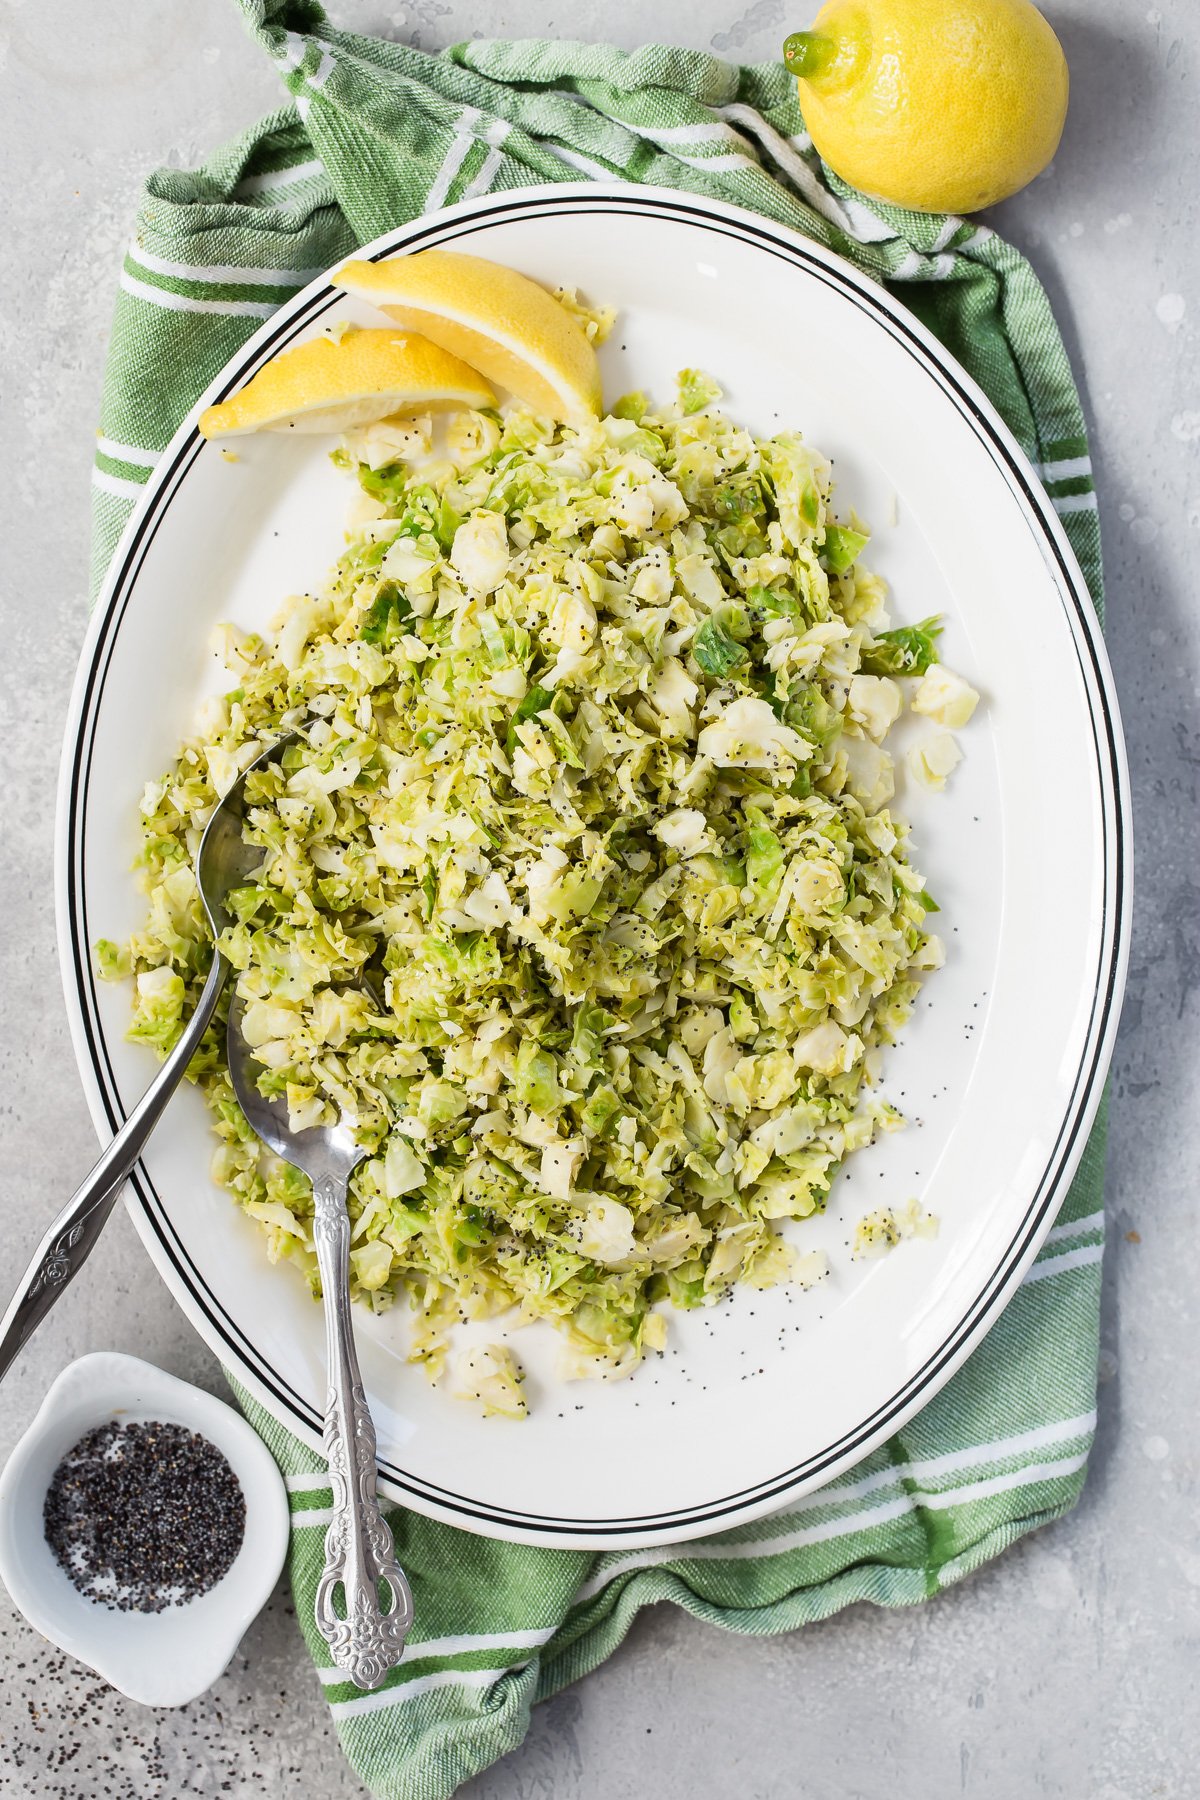 Shredded Brussels Sprouts with Lemon and Poppy Seeds from Weelicious.com